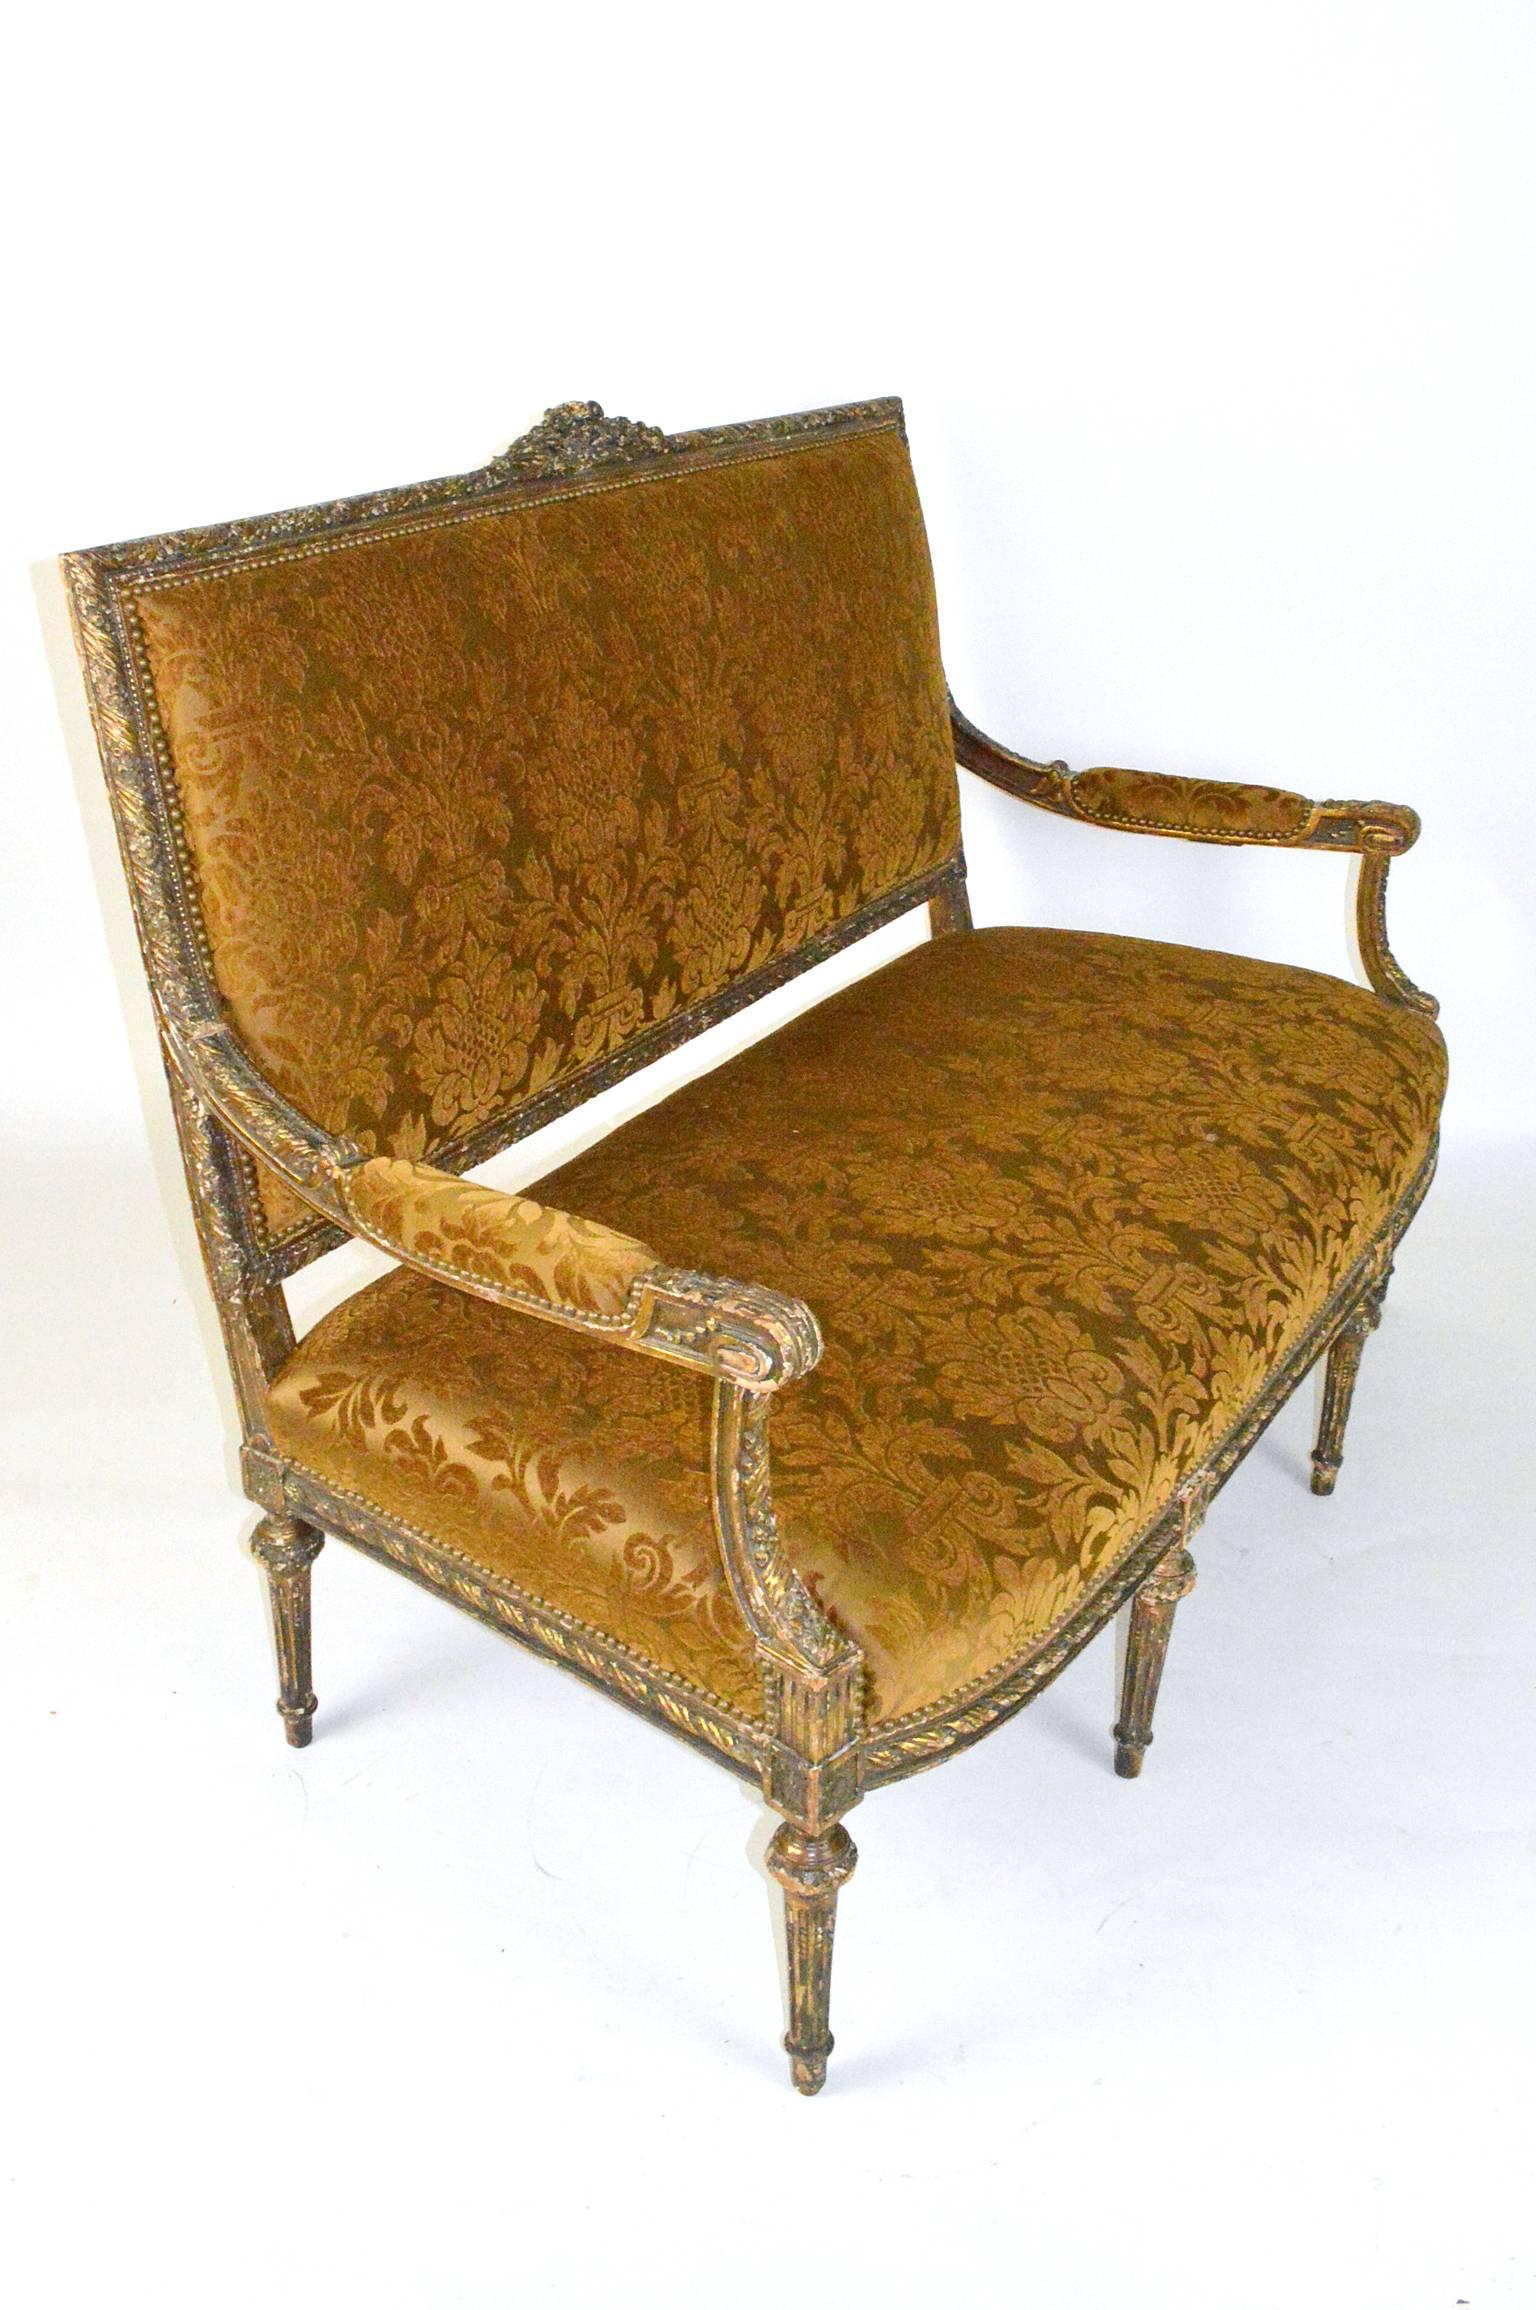 19th Century French Louis XVI Style Carved Painted Gilt Settee For Sale 3